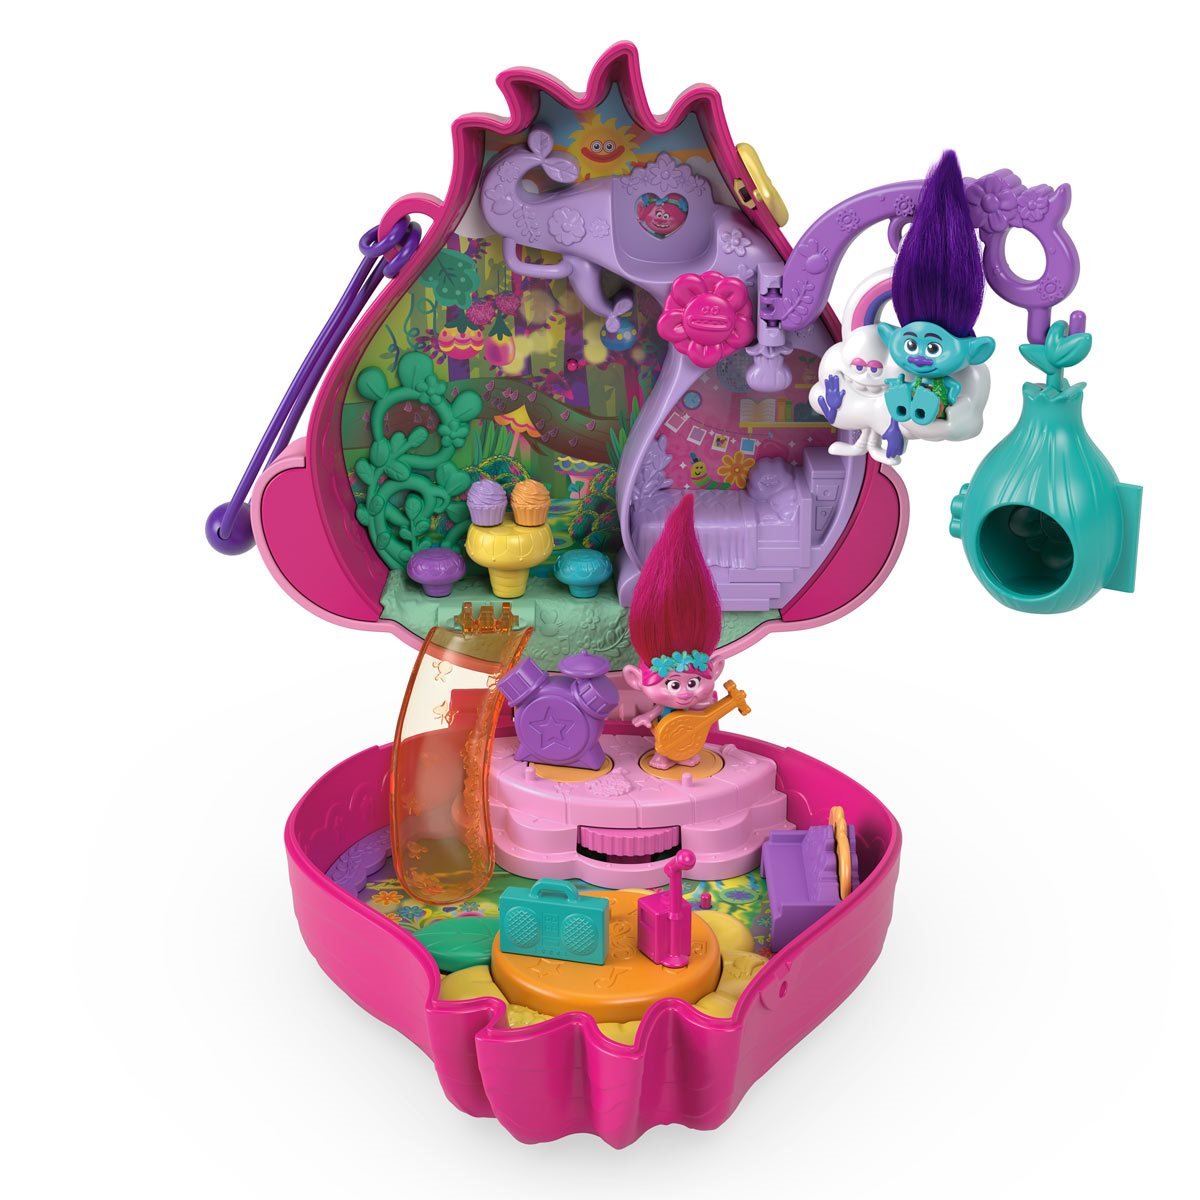  Polly Pocket Compact Playset, Doggy Birthday Bash with